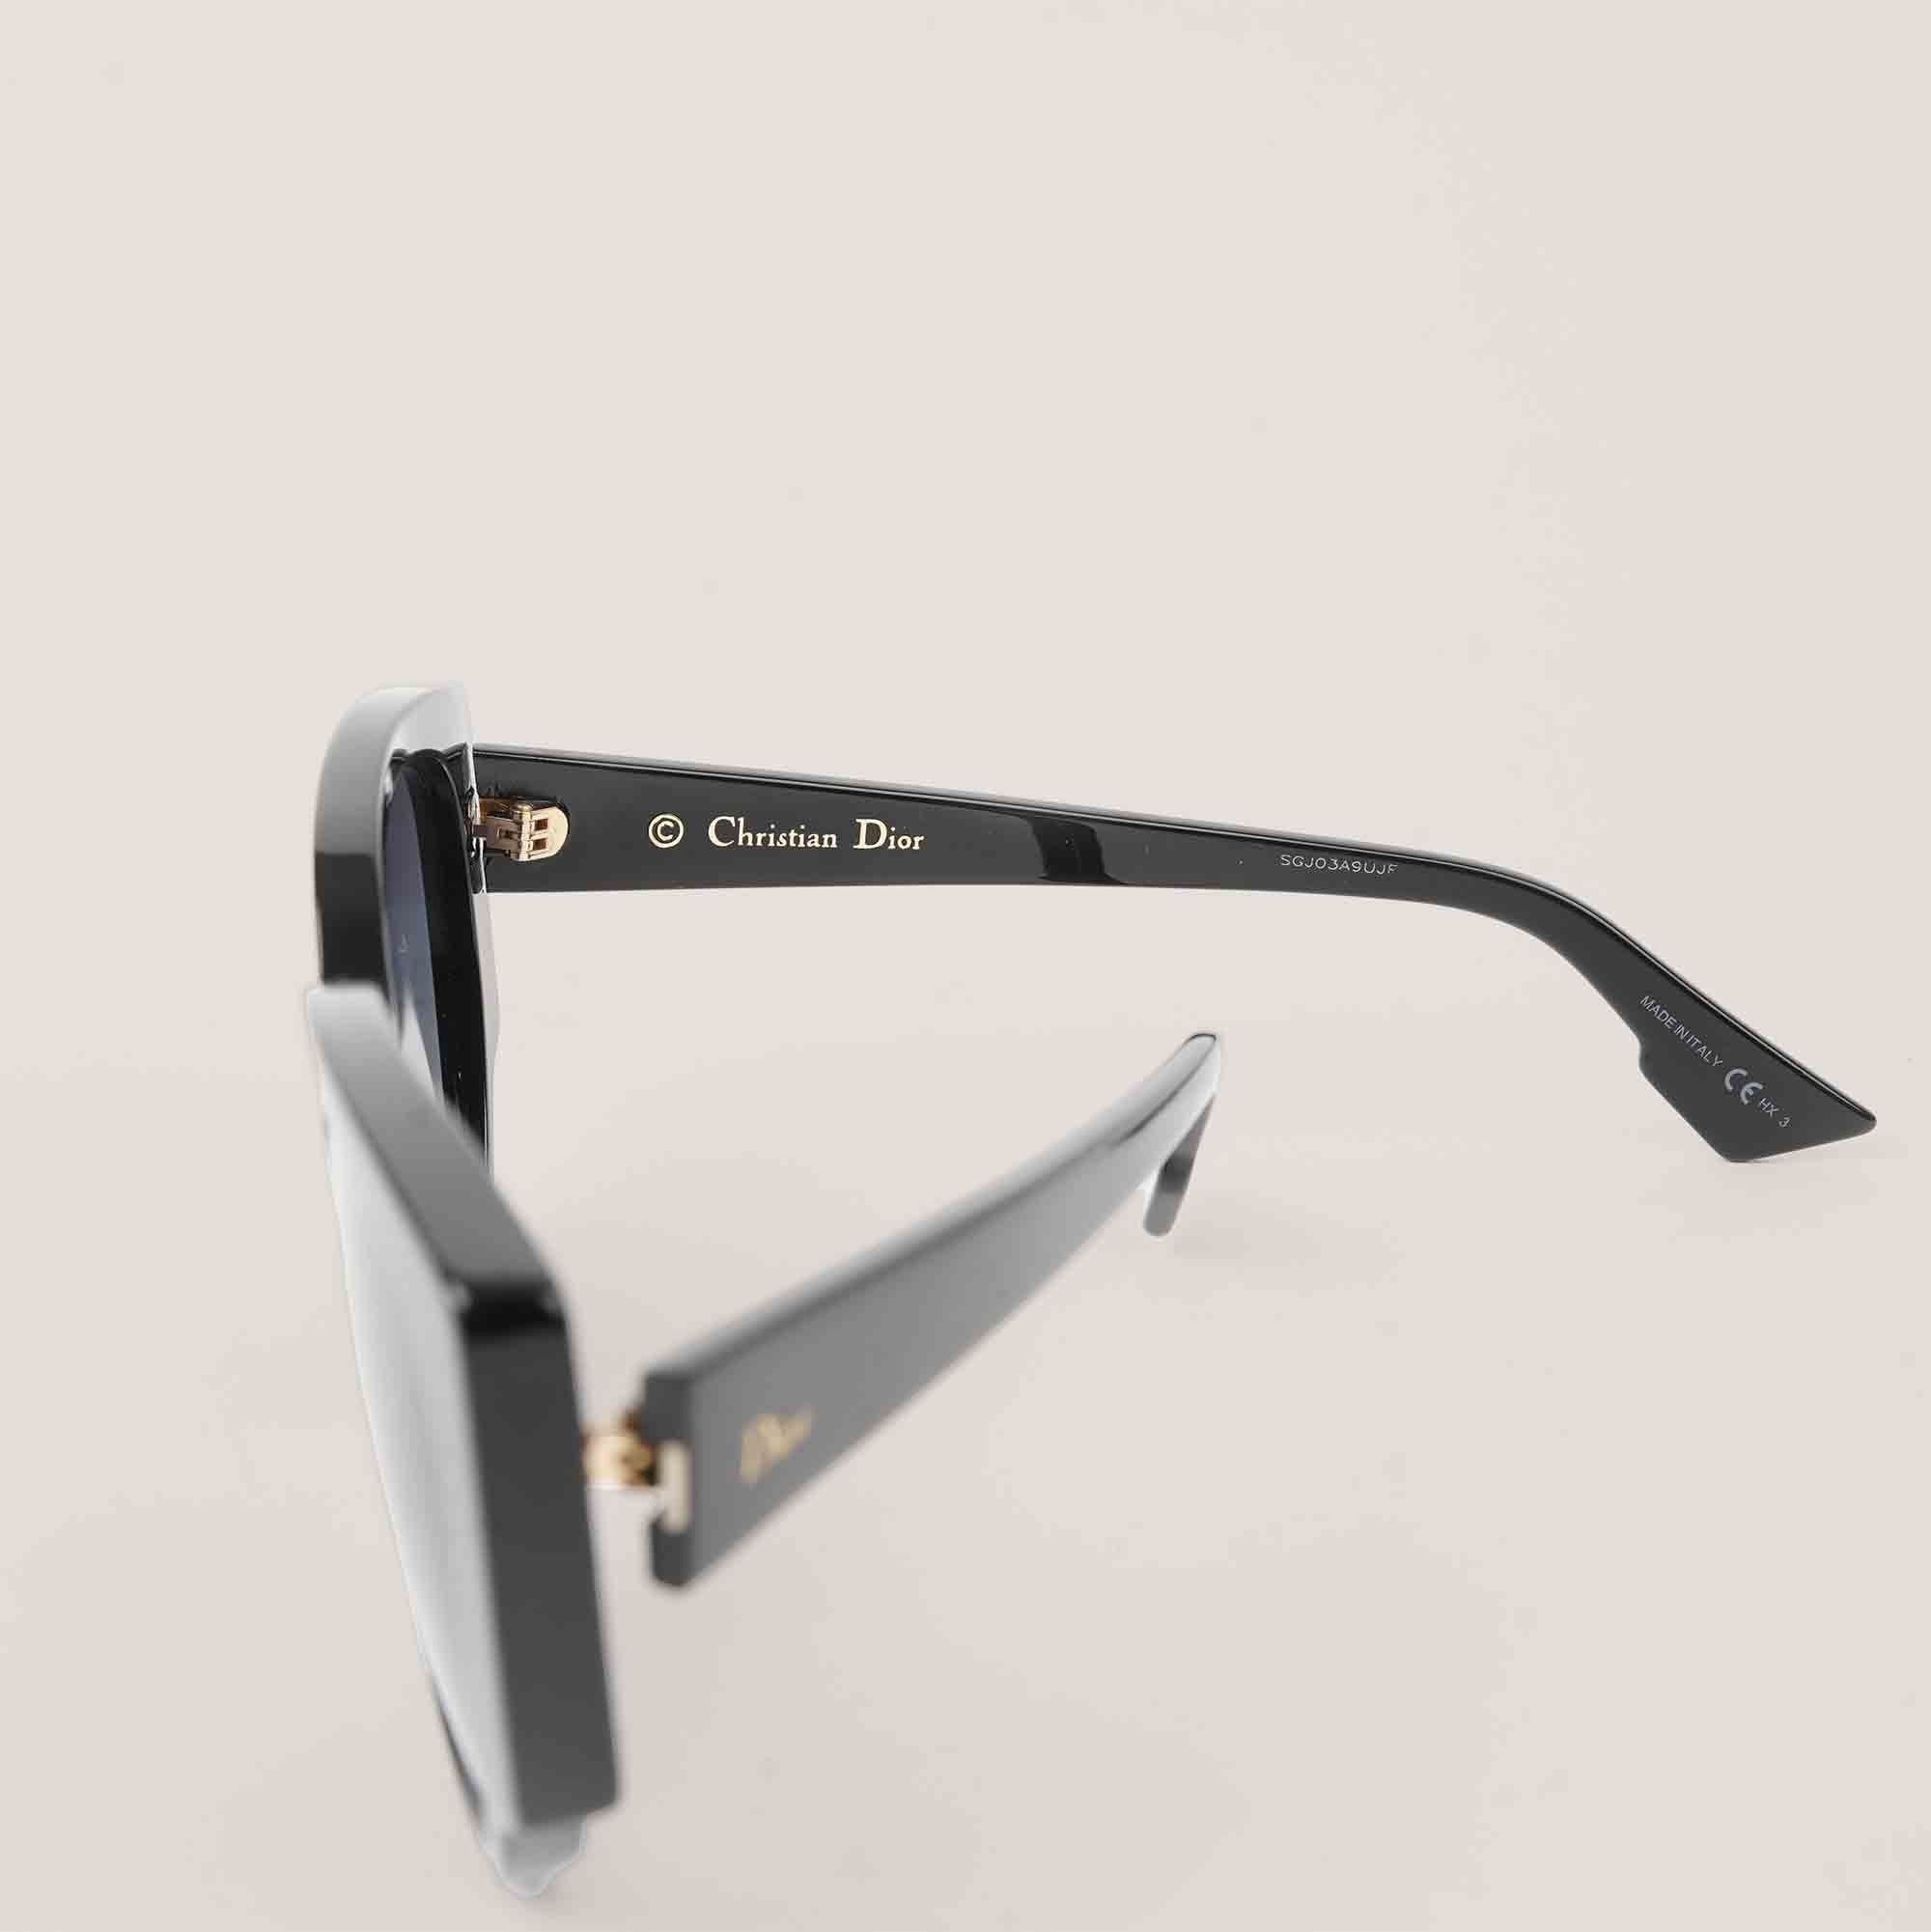 Diornight 1 Sunglasses - CHRISTIAN DIOR - Affordable Luxury image